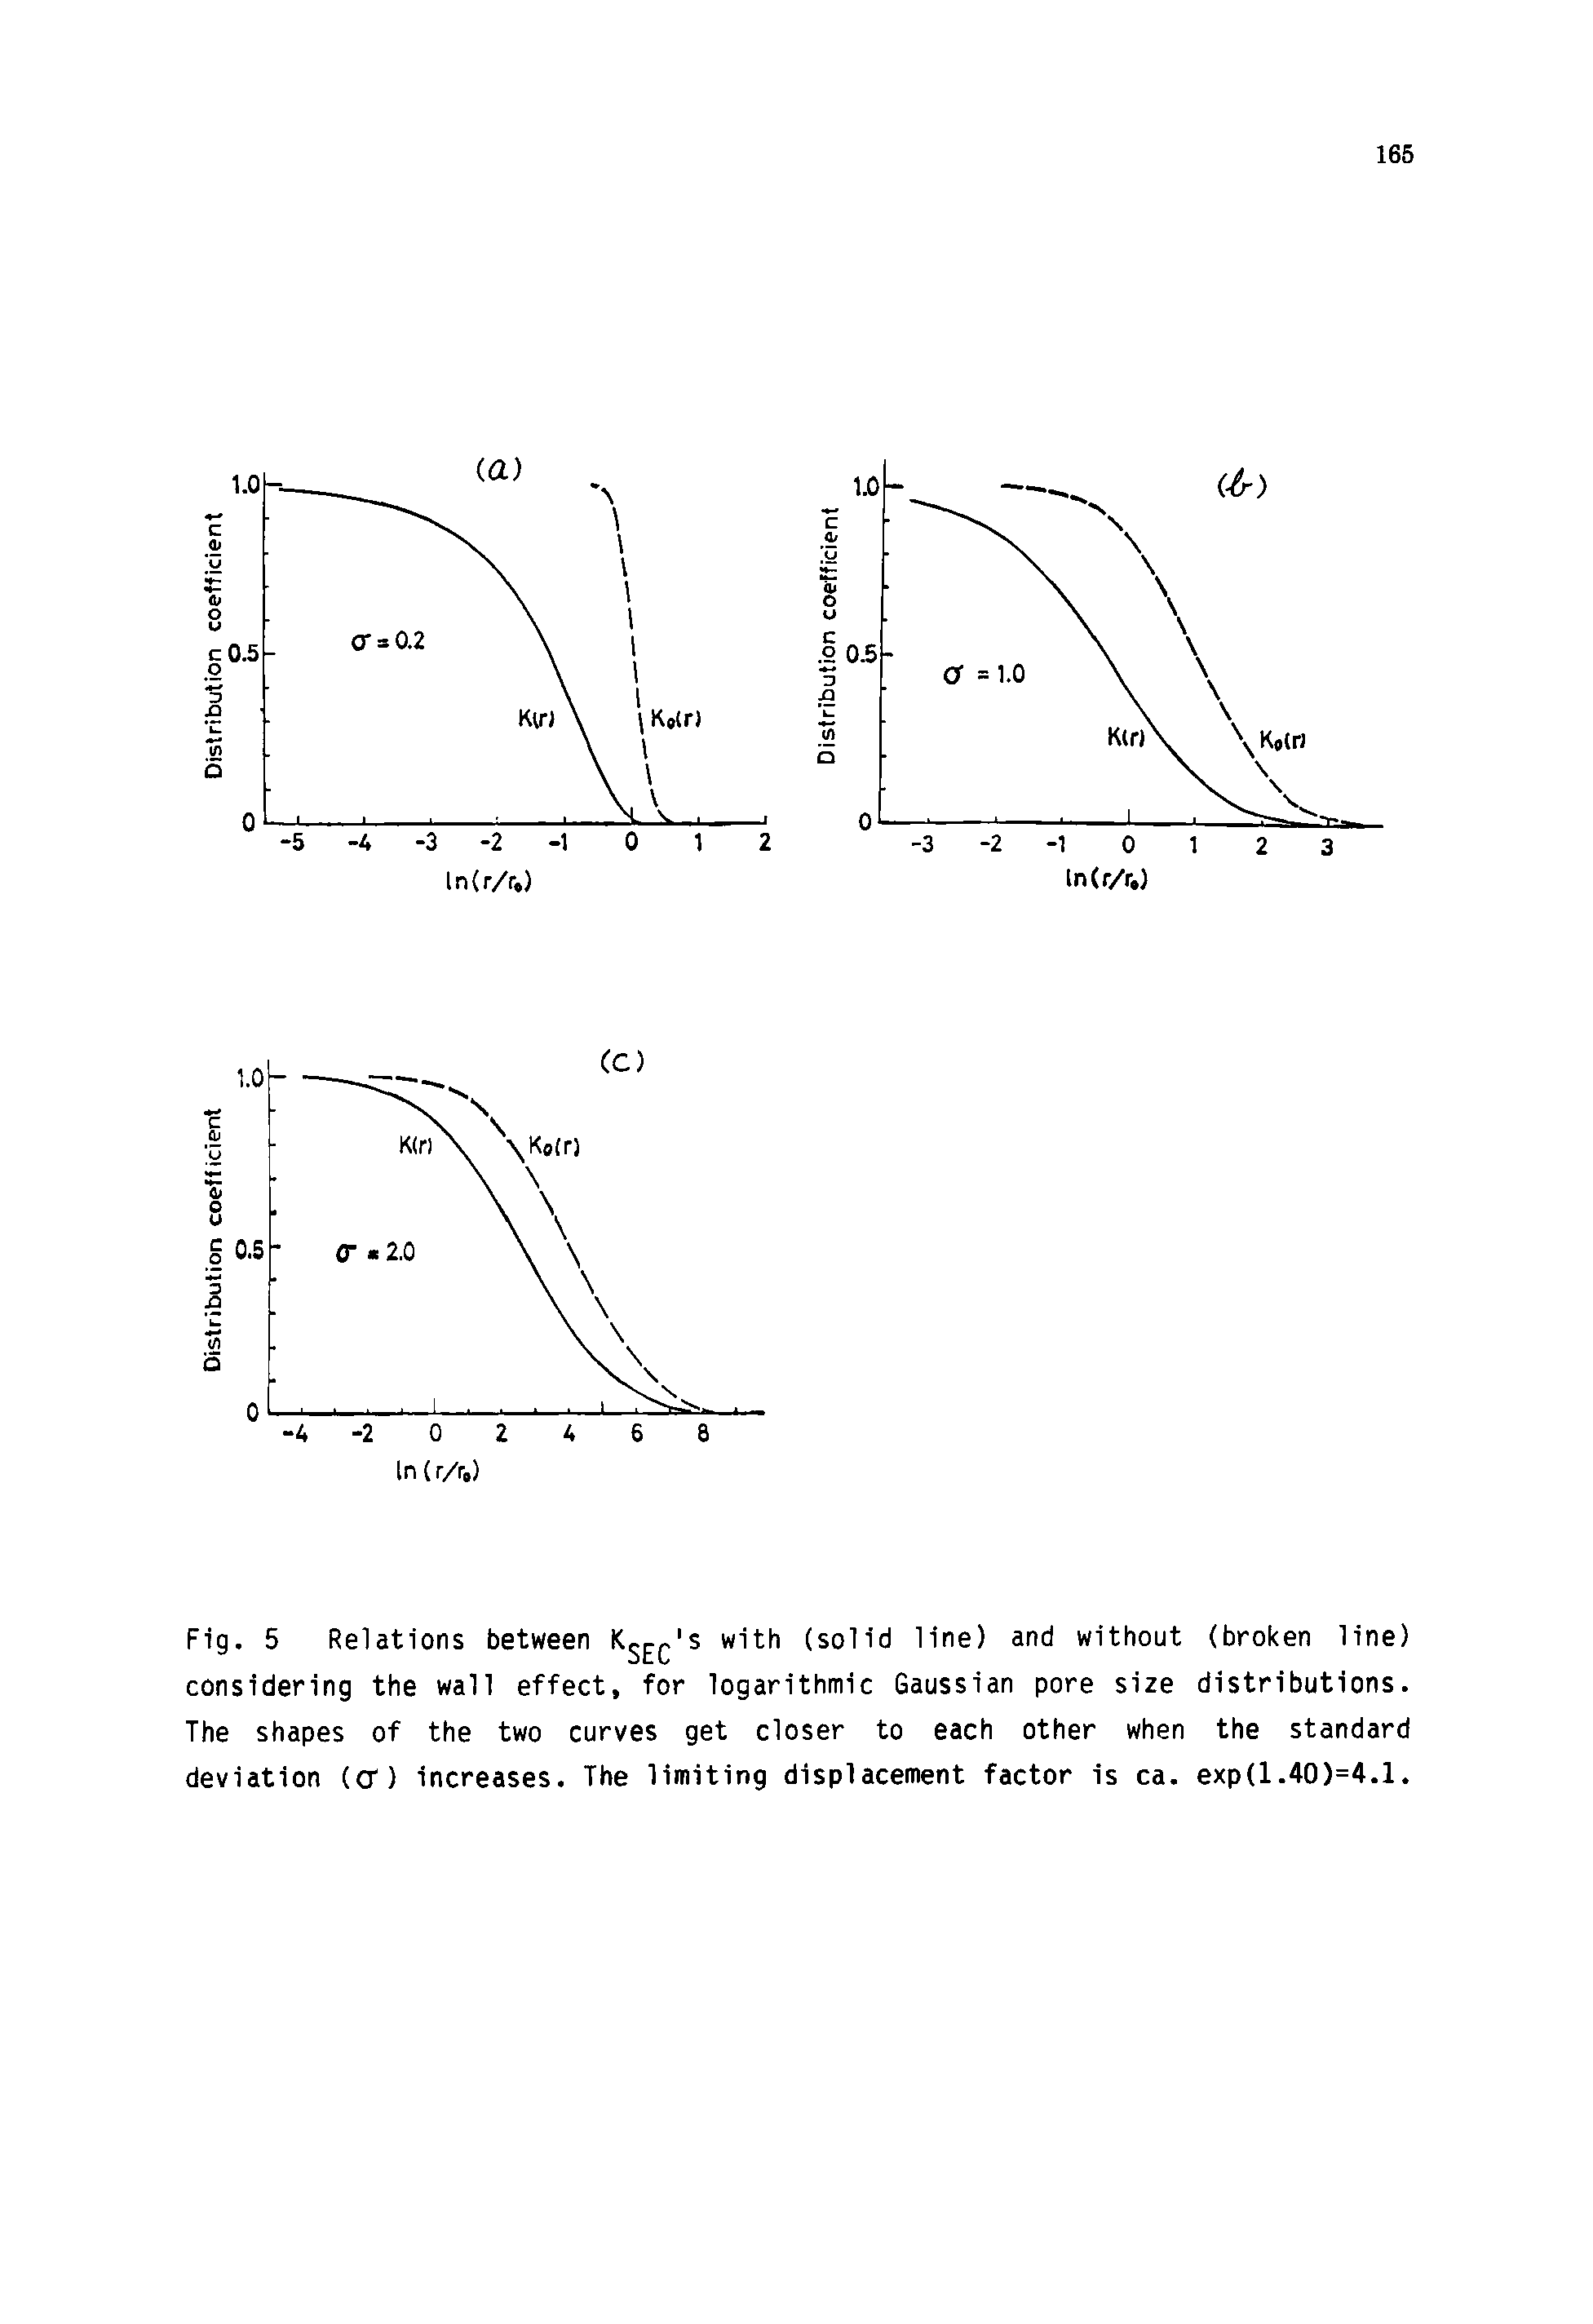 Fig. 5 Relations between with (solid line) and without (broken line) considering the wall effect, for logarithmic Gaussian pore size distributions. The shapes of the two curves get closer to each other when the standard deviation (o ) increases. The limiting displacement factor is ca. exp(1.40)=4.1.